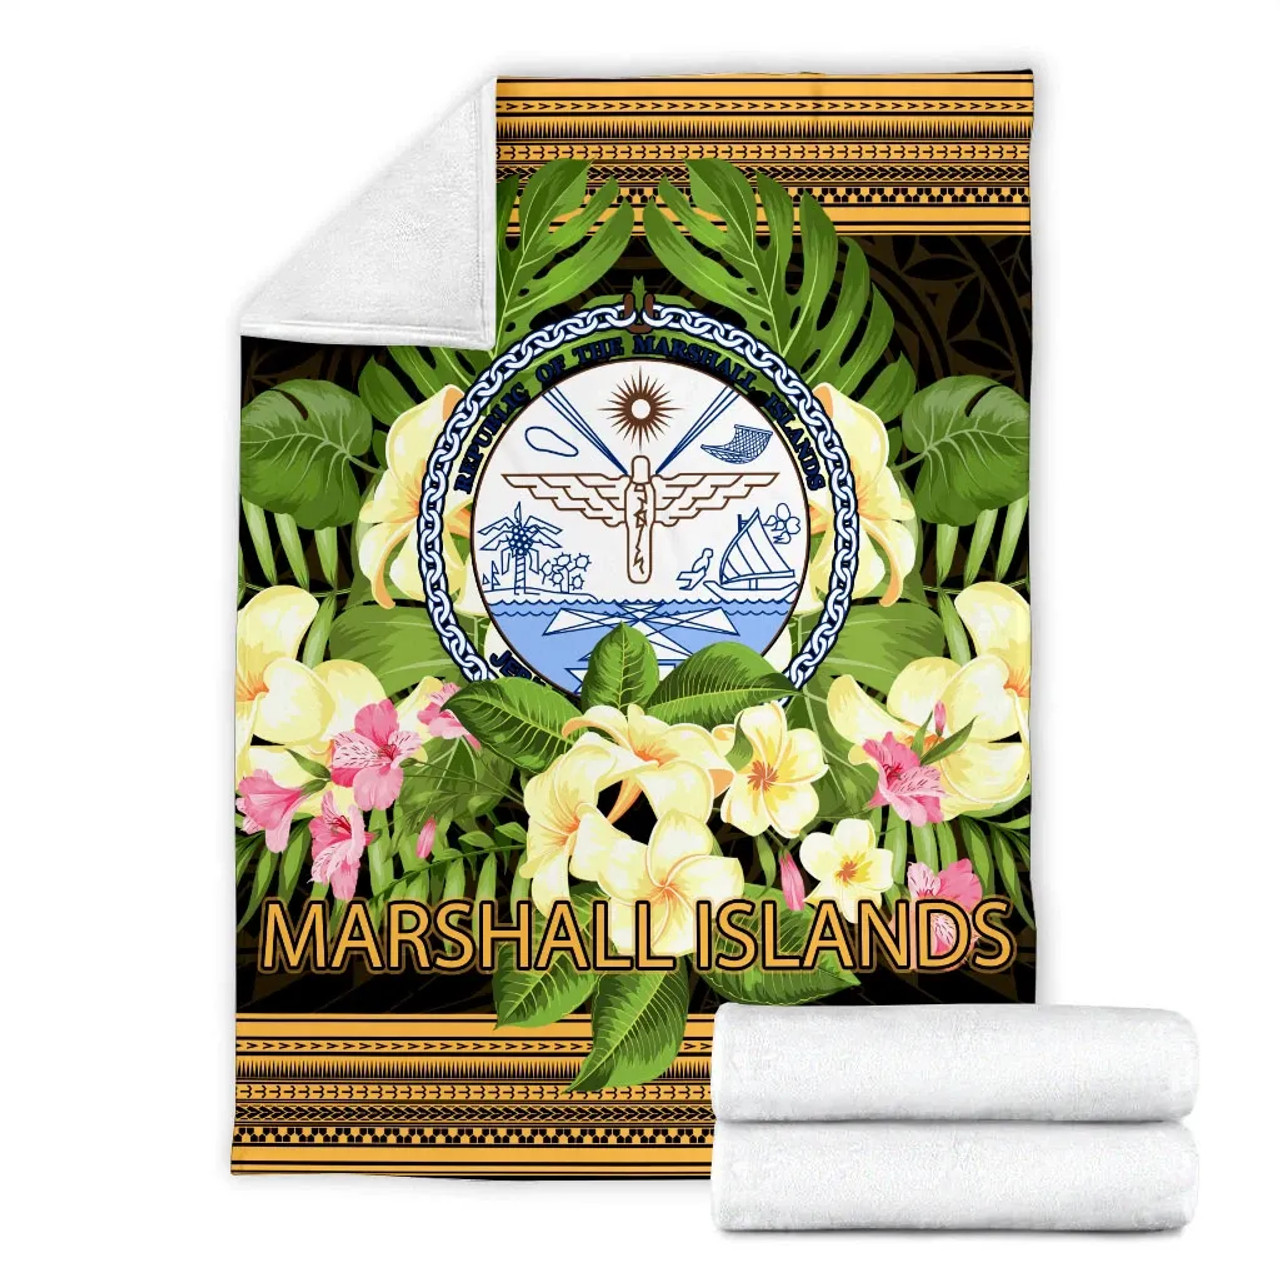 Marshall Islands Premium Blanket - Polynesian Gold Patterns Collection 5